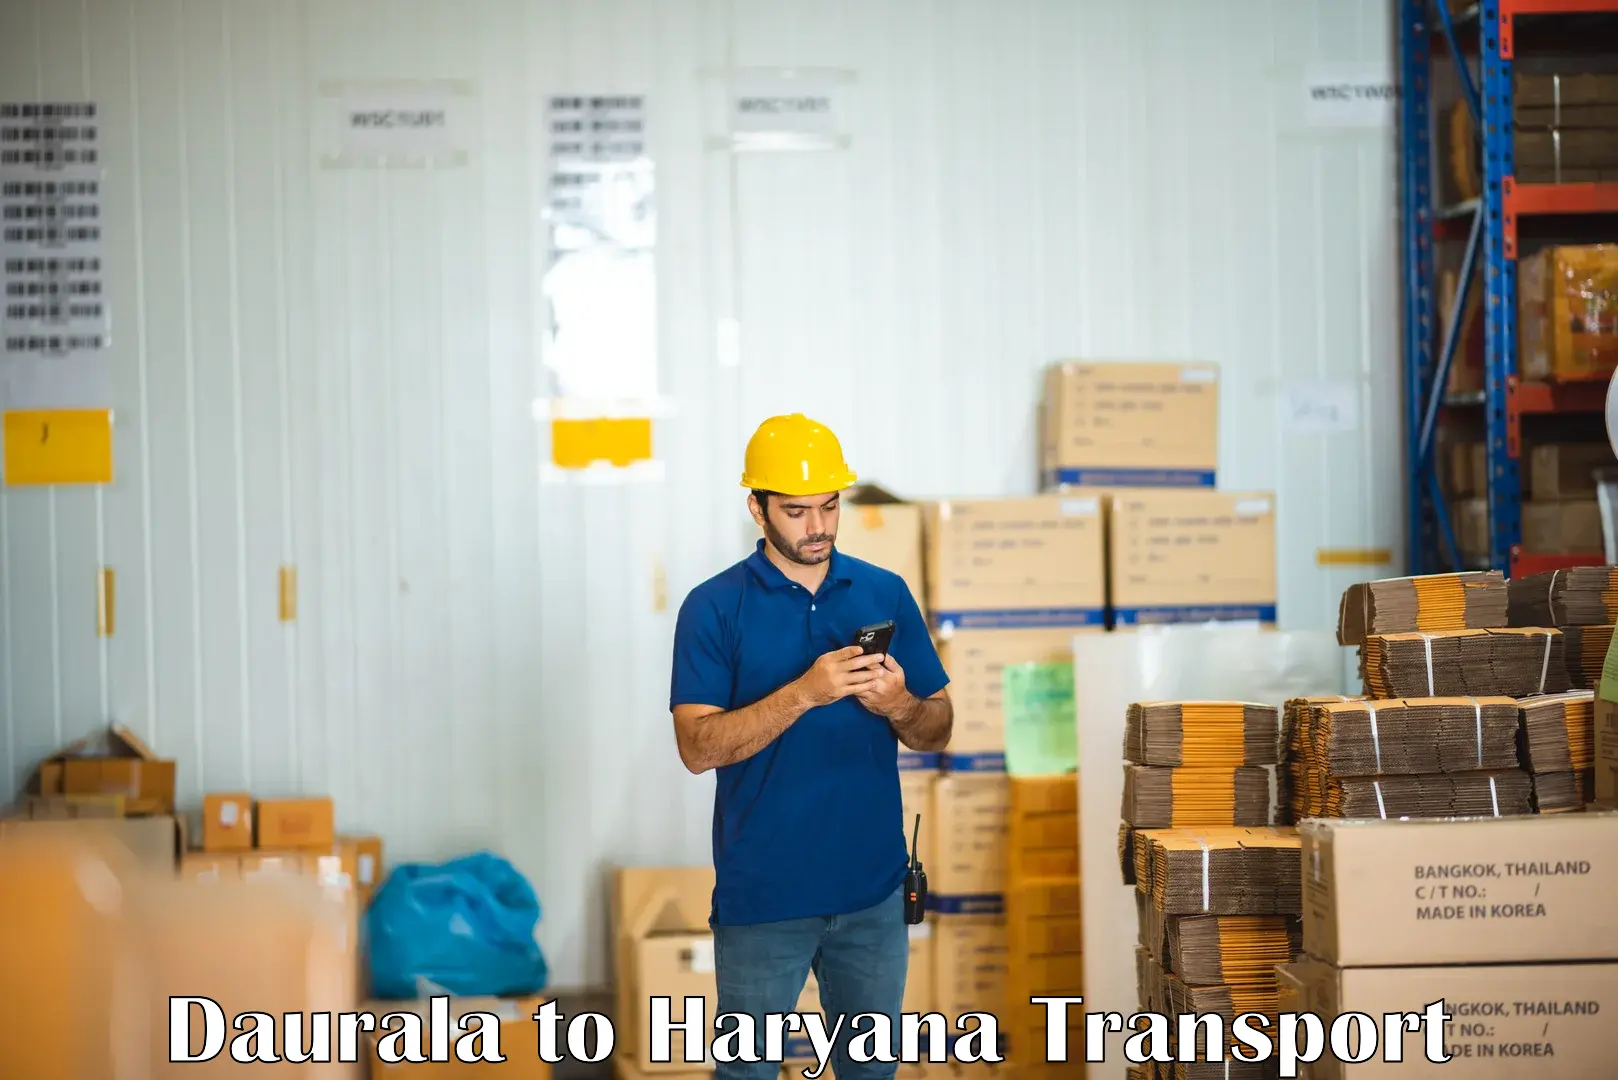 Commercial transport service Daurala to NCR Haryana